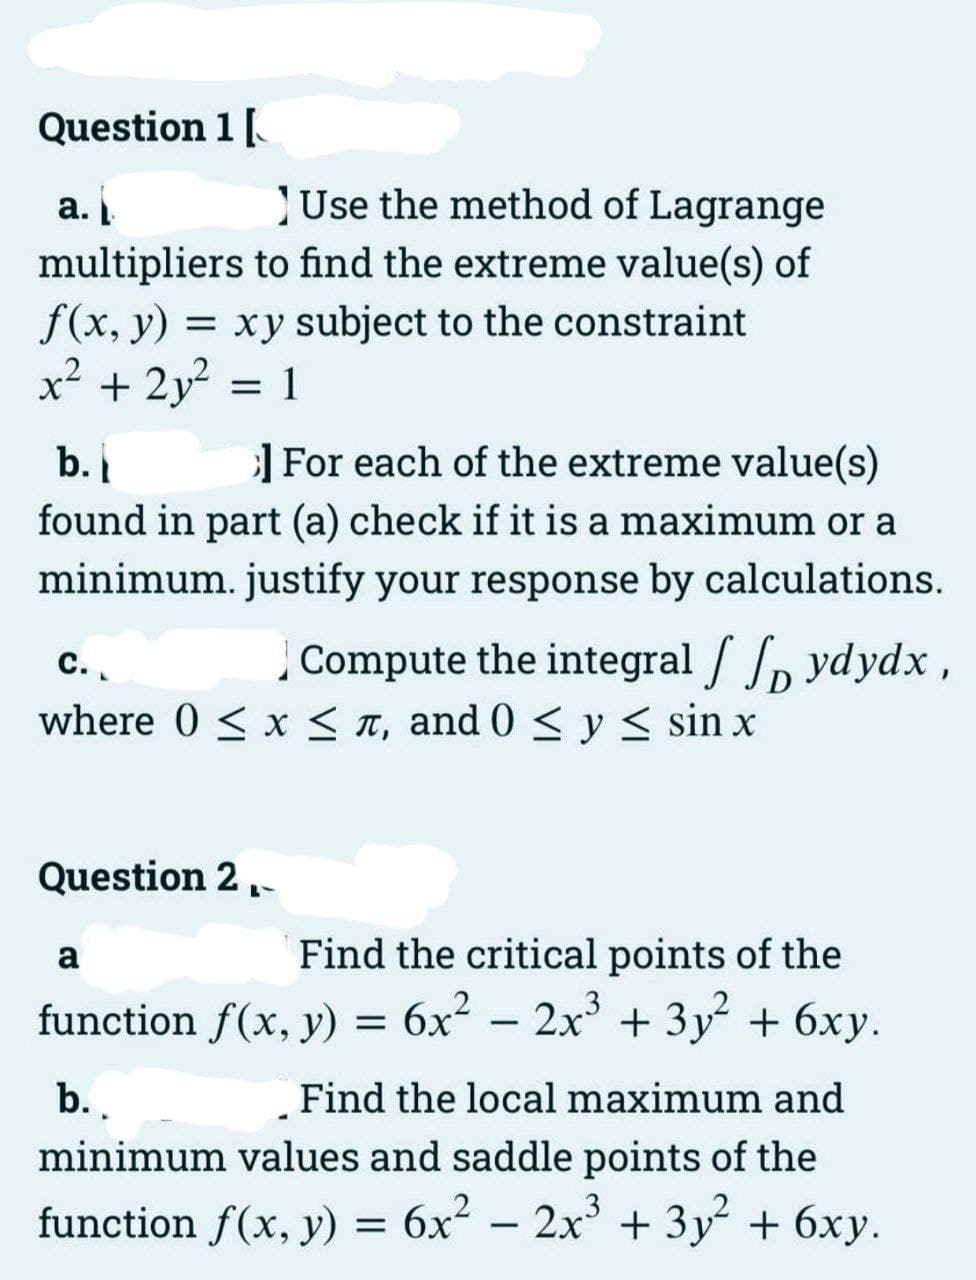 Question 1 [
Use the method of Lagrange
multipliers to find the extreme value(s) of
f(x, y) = xy subject to the constraint
x² + 2y² = 1
a.
b.
]For each of the extreme value(s)
found in part (a) check if it is a maximum or a
minimum. justify your response by calculations.
C.
Compute the integral / ydydx,
where 0 ≤ x ≤, and 0 ≤ y ≤ sin x
Question 2.
Find the critical points of the
function f(x, y) = 6x² - 2x³ + 3y² + 6xy.
a
b..
Find the local maximum and
minimum values and saddle points of the
function f(x, y) = 6x² - 2x³ + 3y² + 6xy.
3